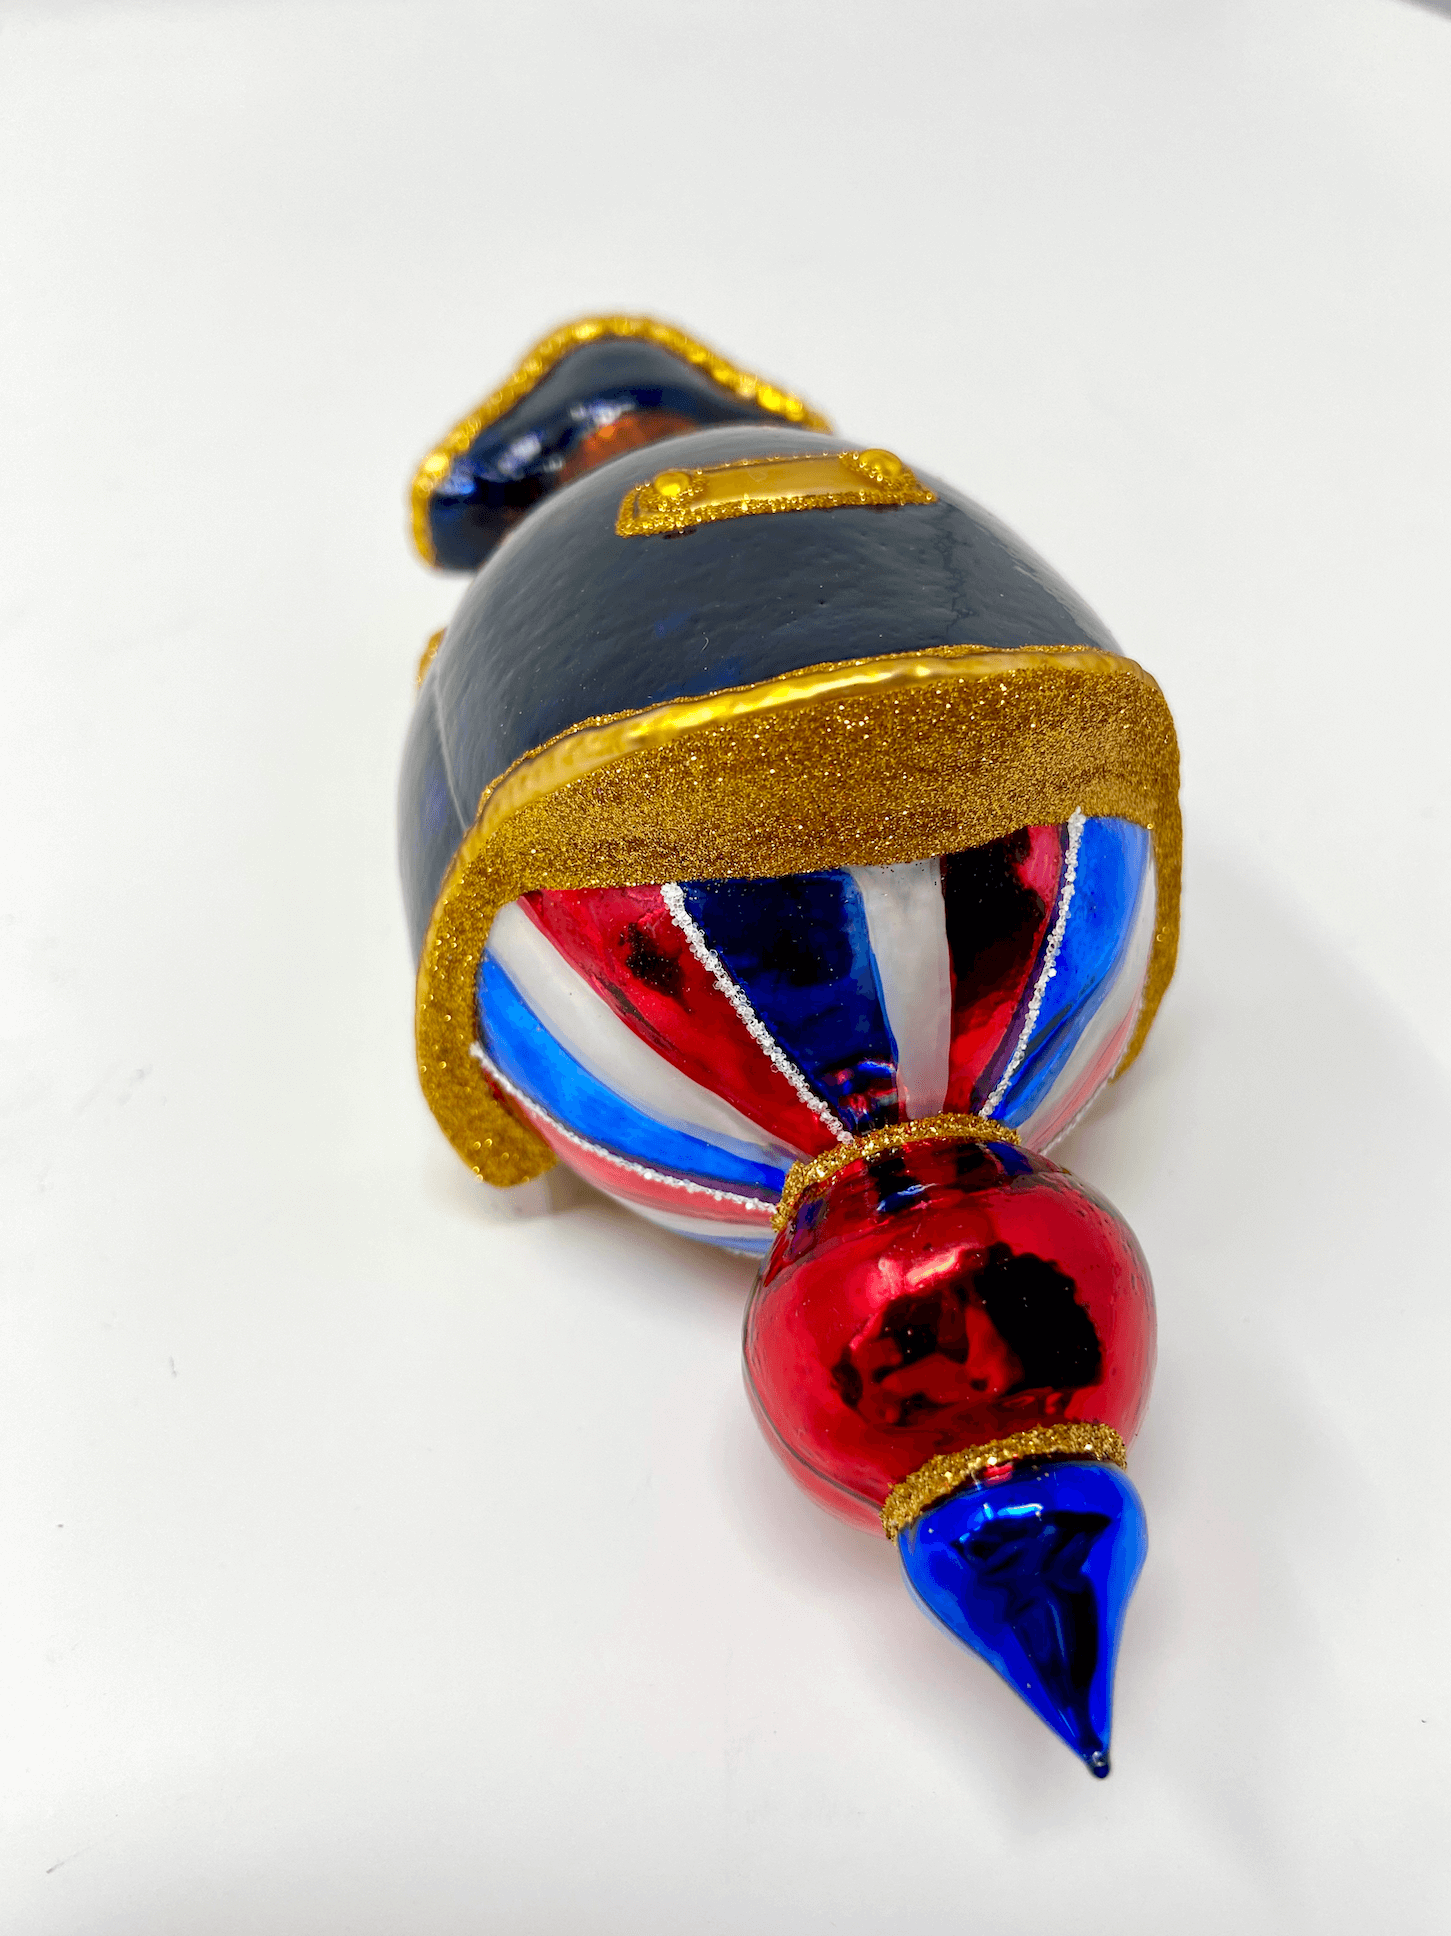 Beautiful Napoleon Bonaparte reflector ornament wearing a black cloak and colonial hat with red white and blue patriotic detailing. Polish glass christmas ornaments in saturated colors.